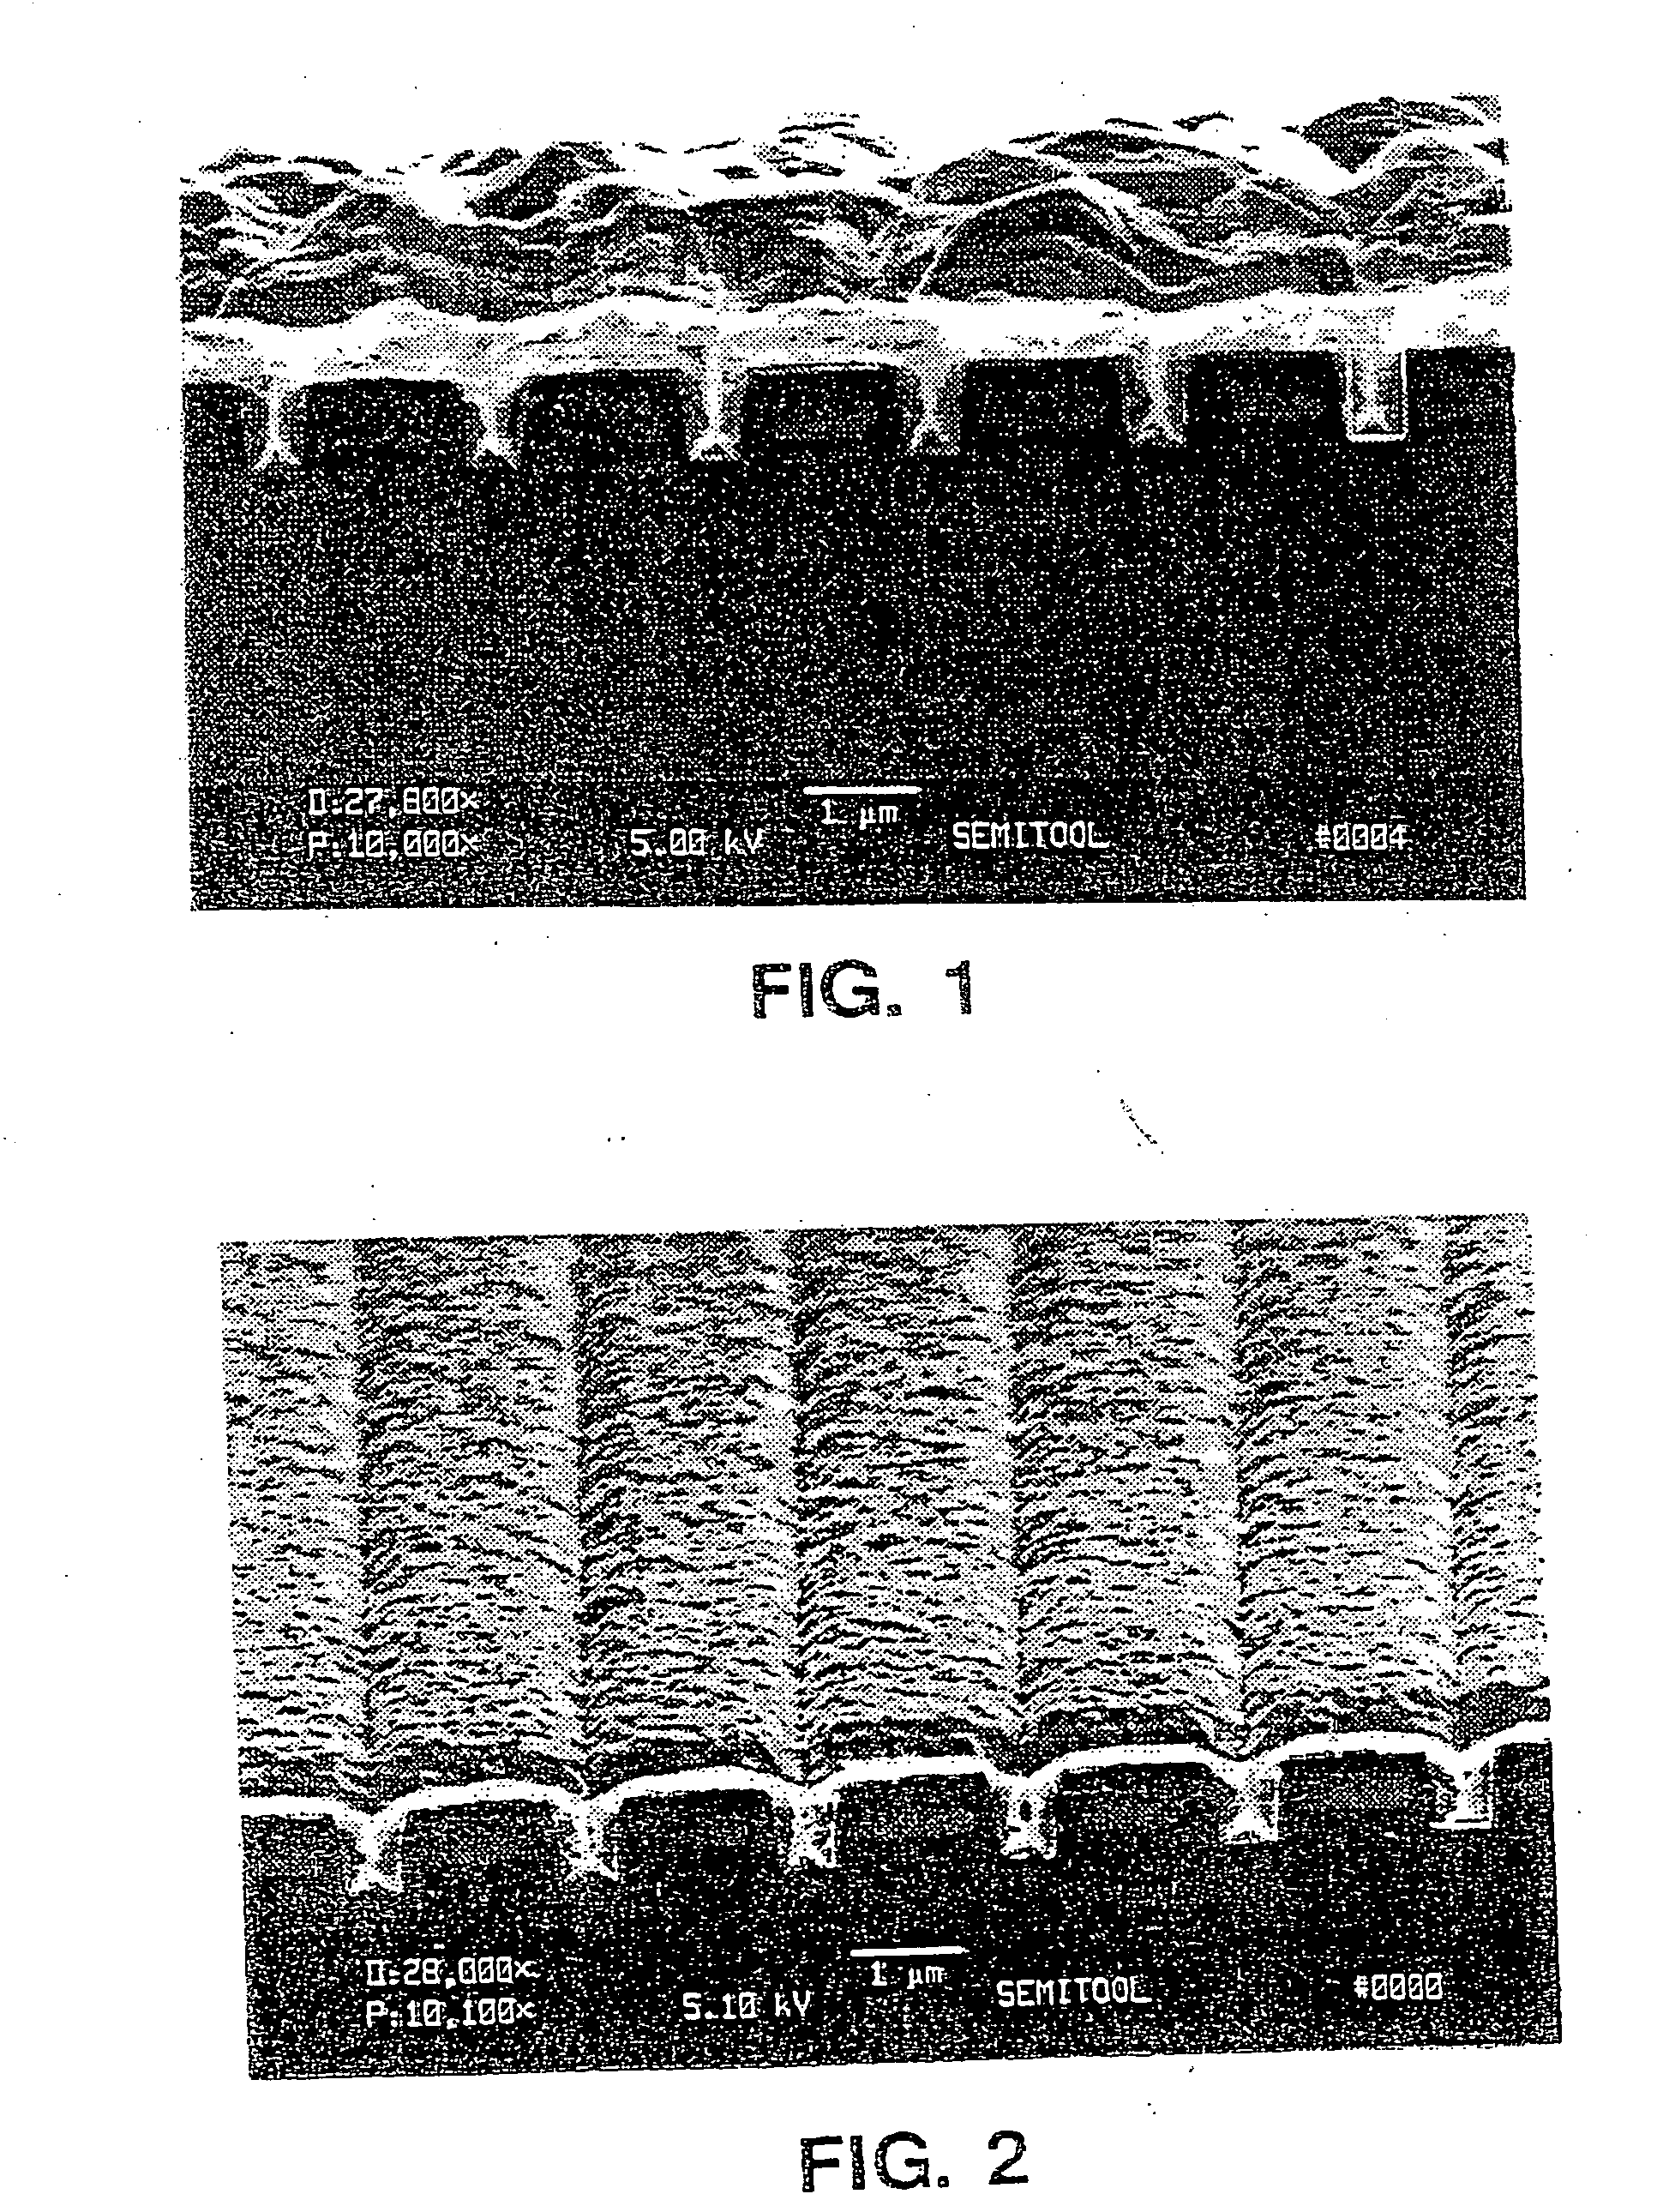 Method of submicron metallization using electrochemical deposition of recesses including a first deposition at a first current density and a second deposition at an increased current density